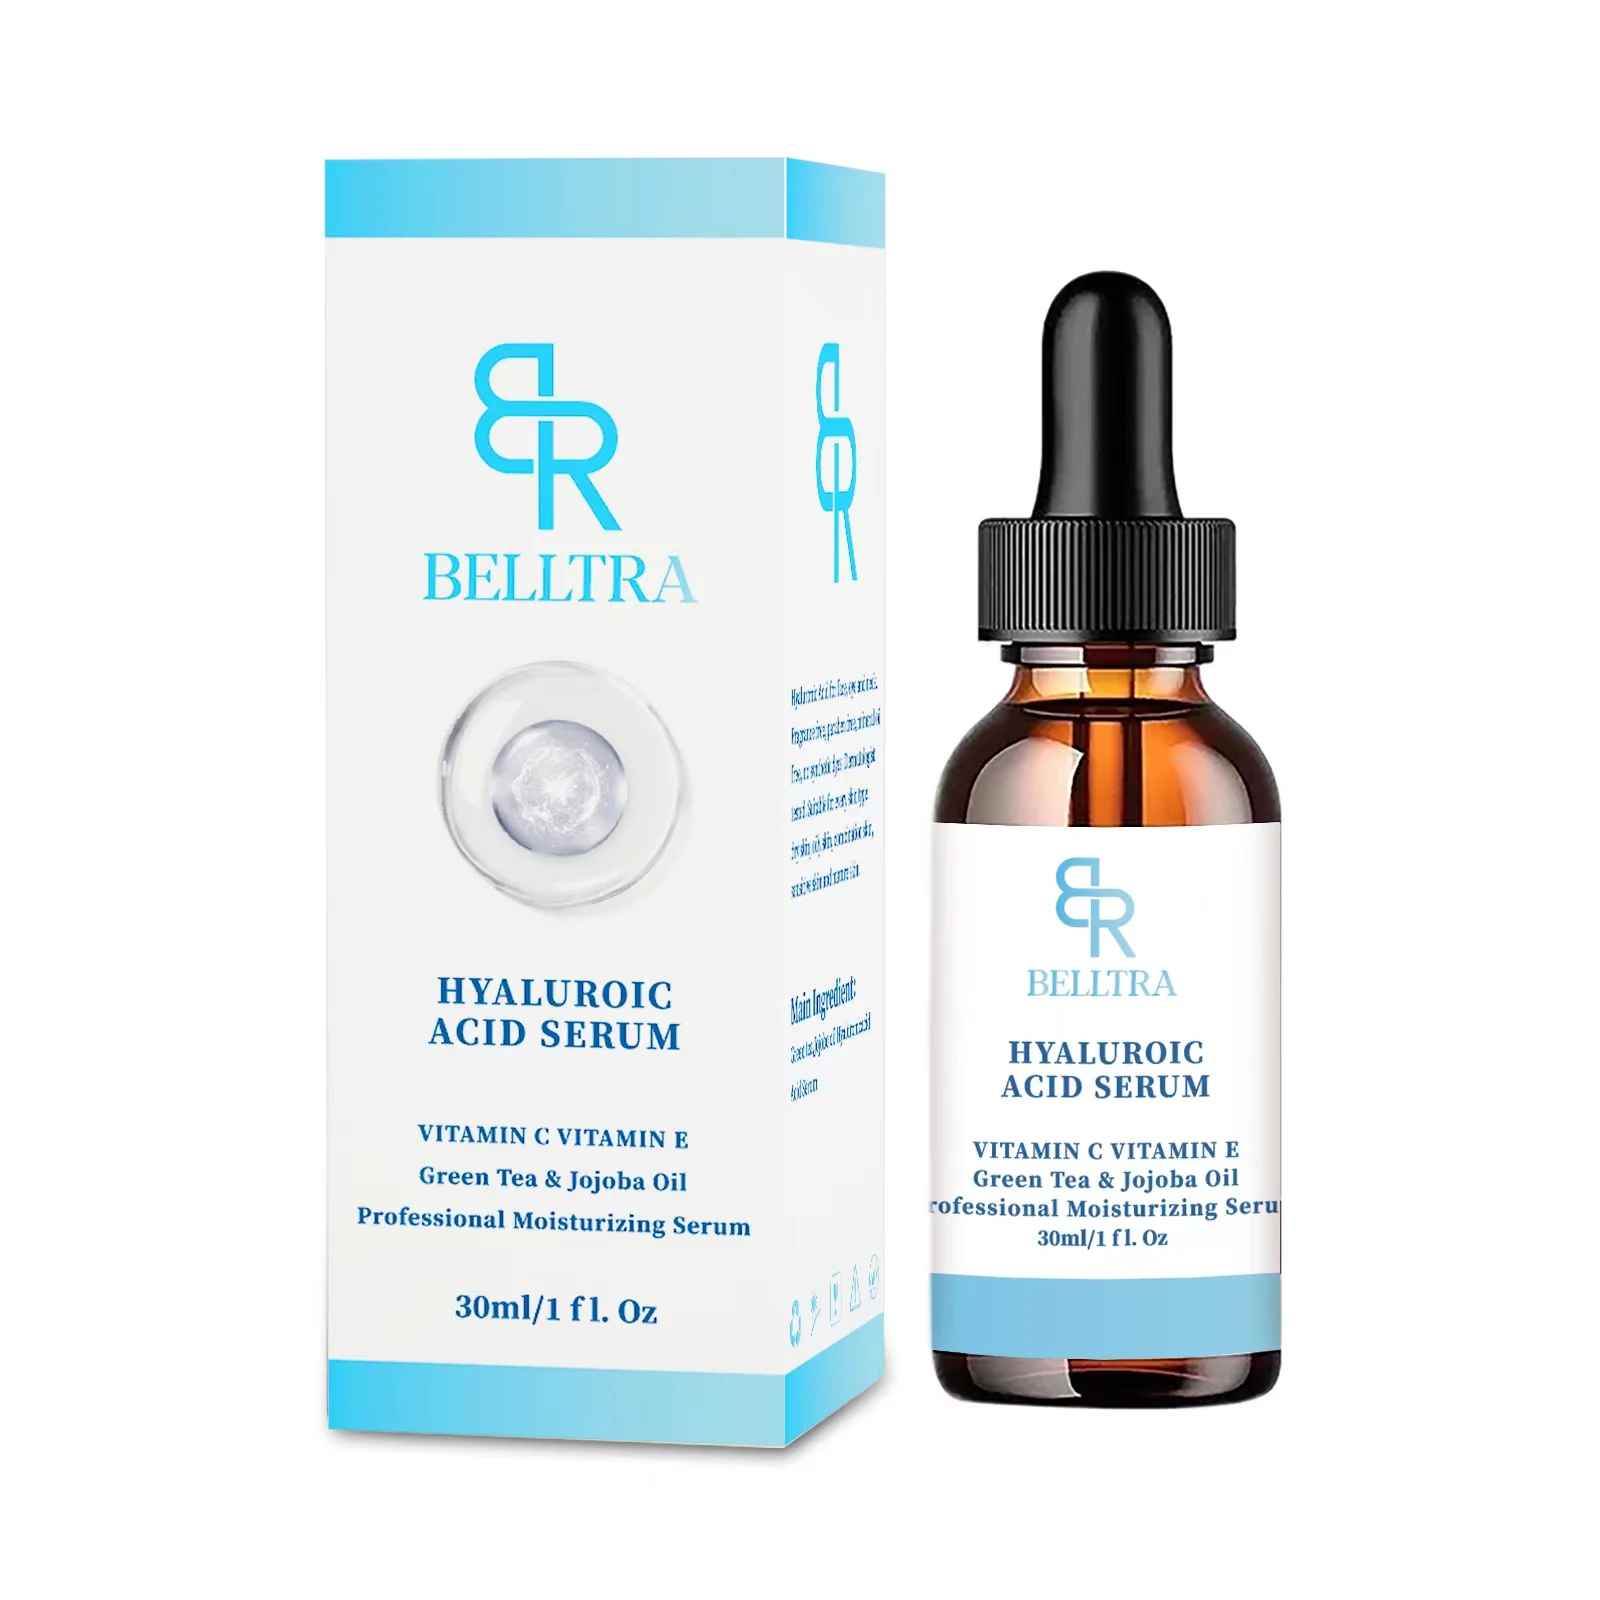 

HYALUROIC ACID SERUM Firming Lifting Anti-Aging Moisturizer Whitening Wrinkle Fine Lines Remove Spots Face Skin Care Serum